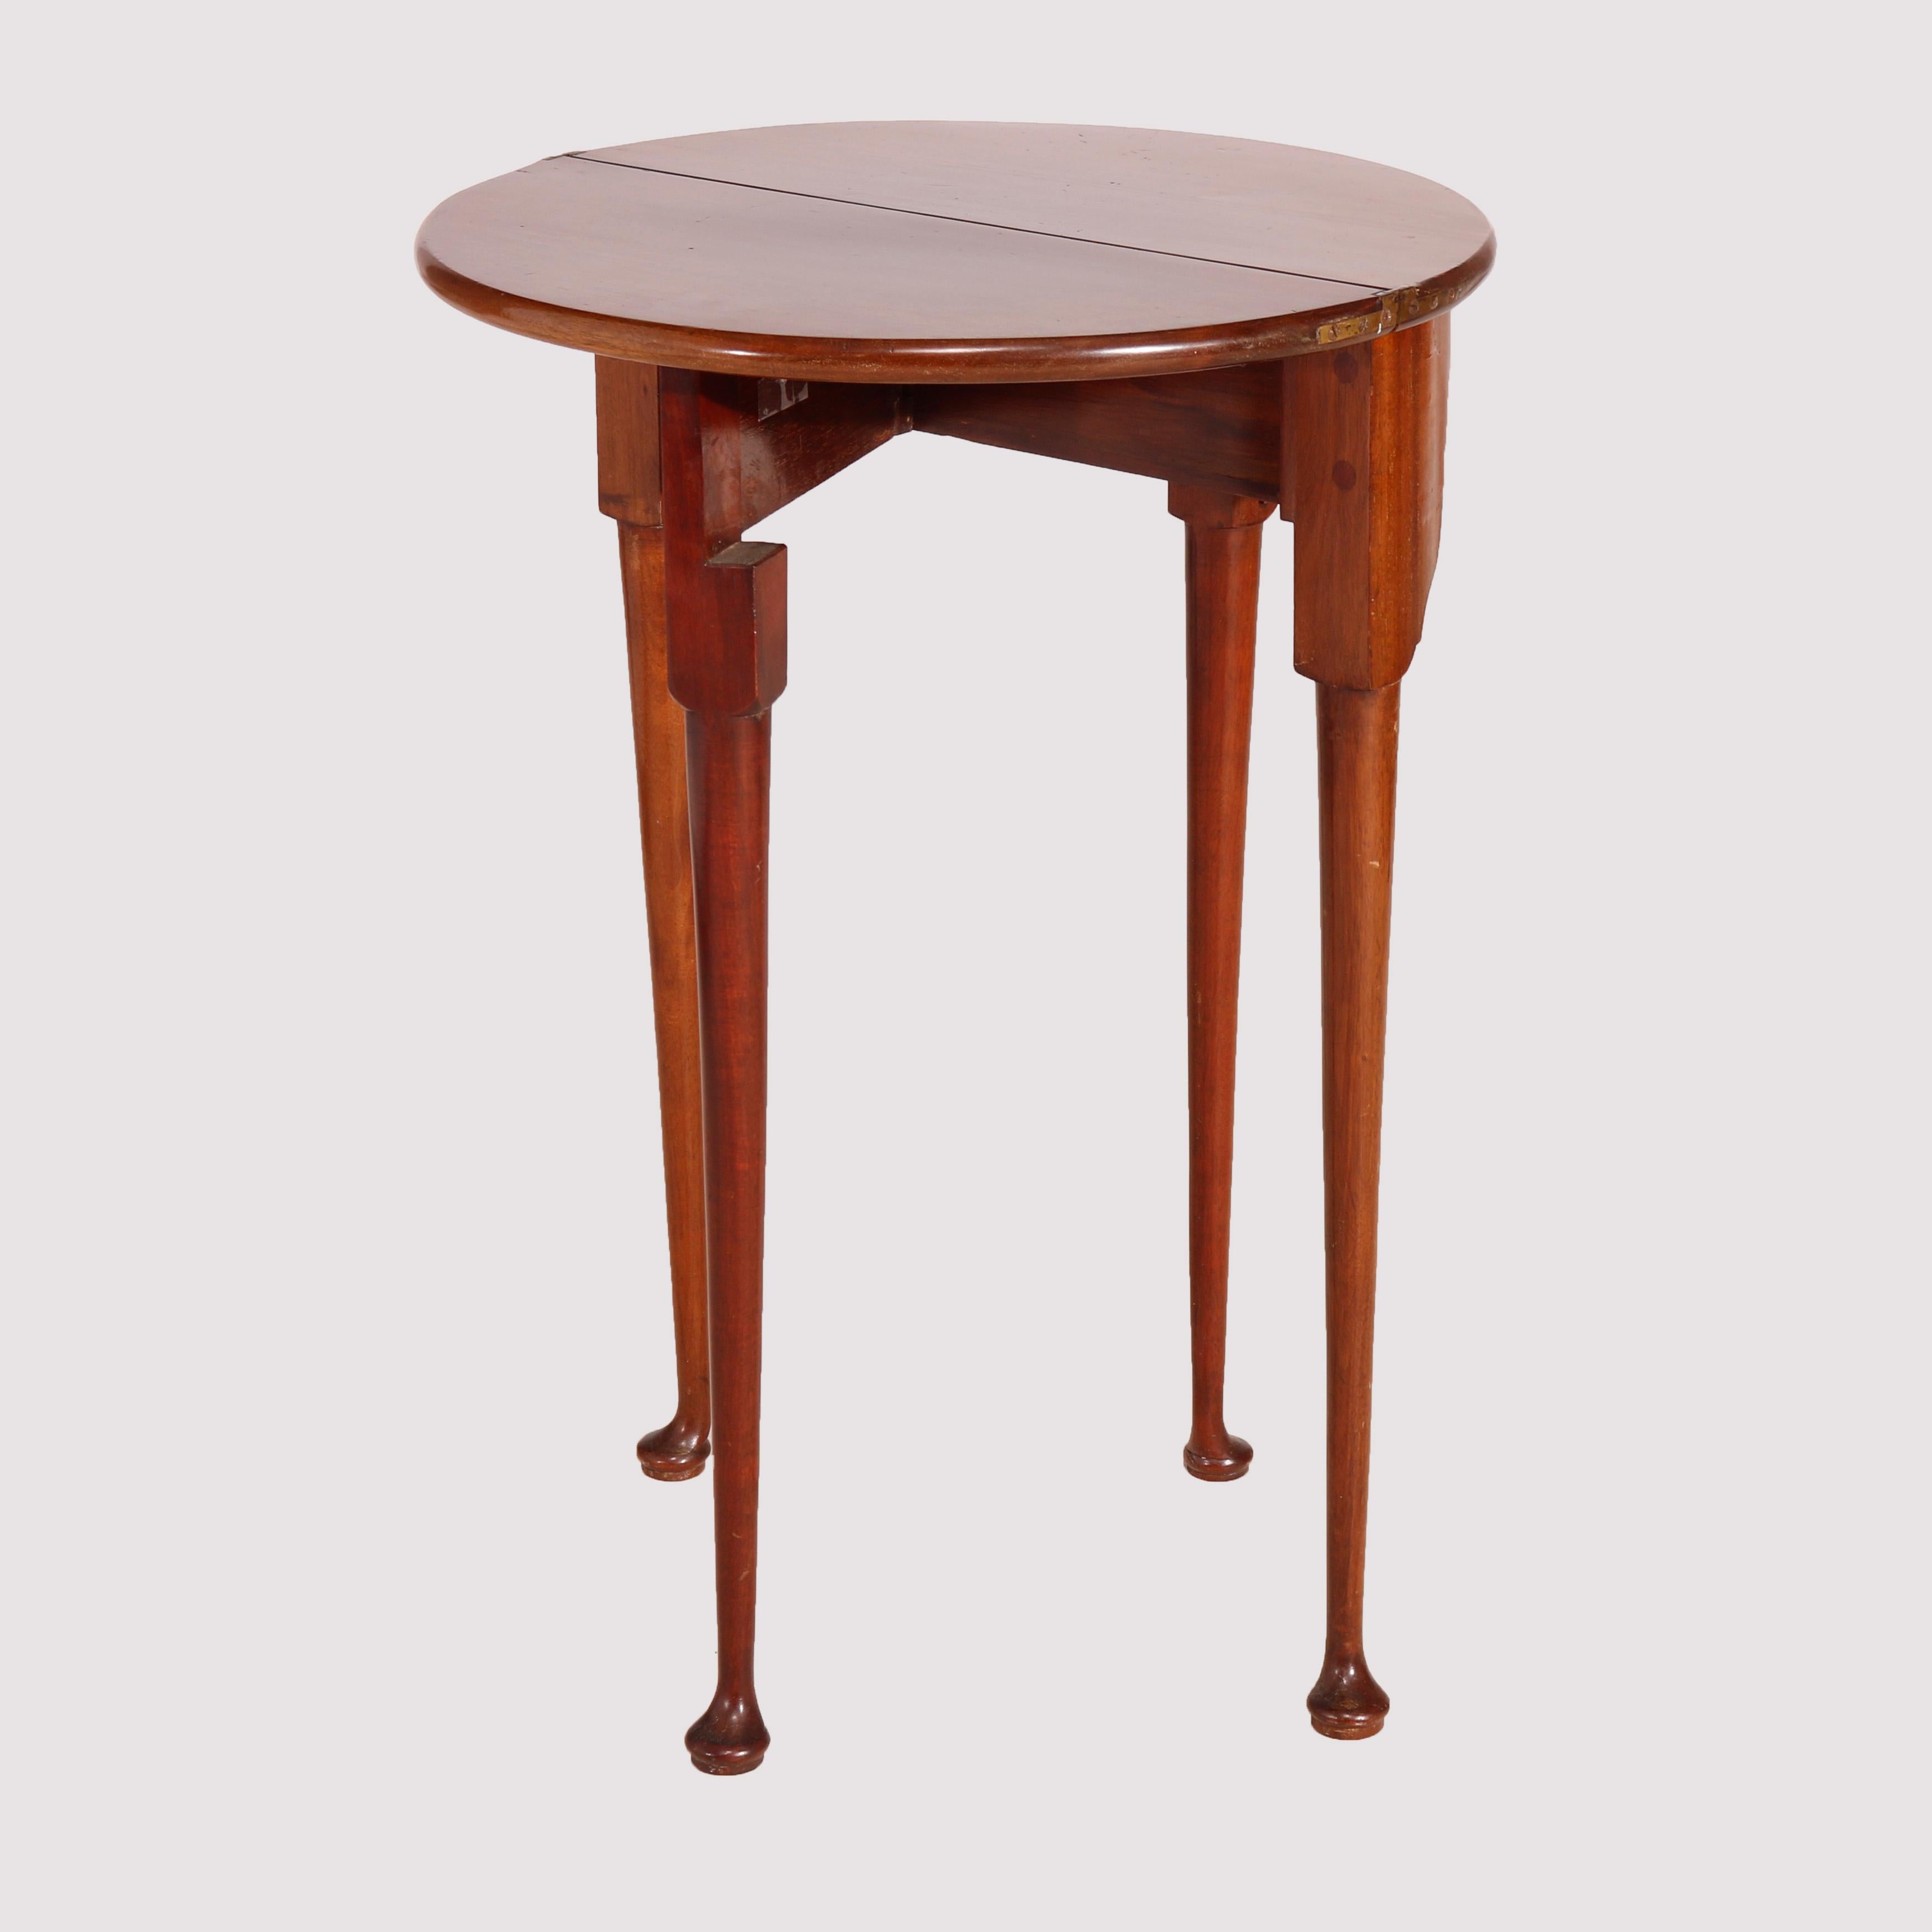 English Queen Anne Mahogany Demilune Lift Top Table, 20th Century For Sale 1